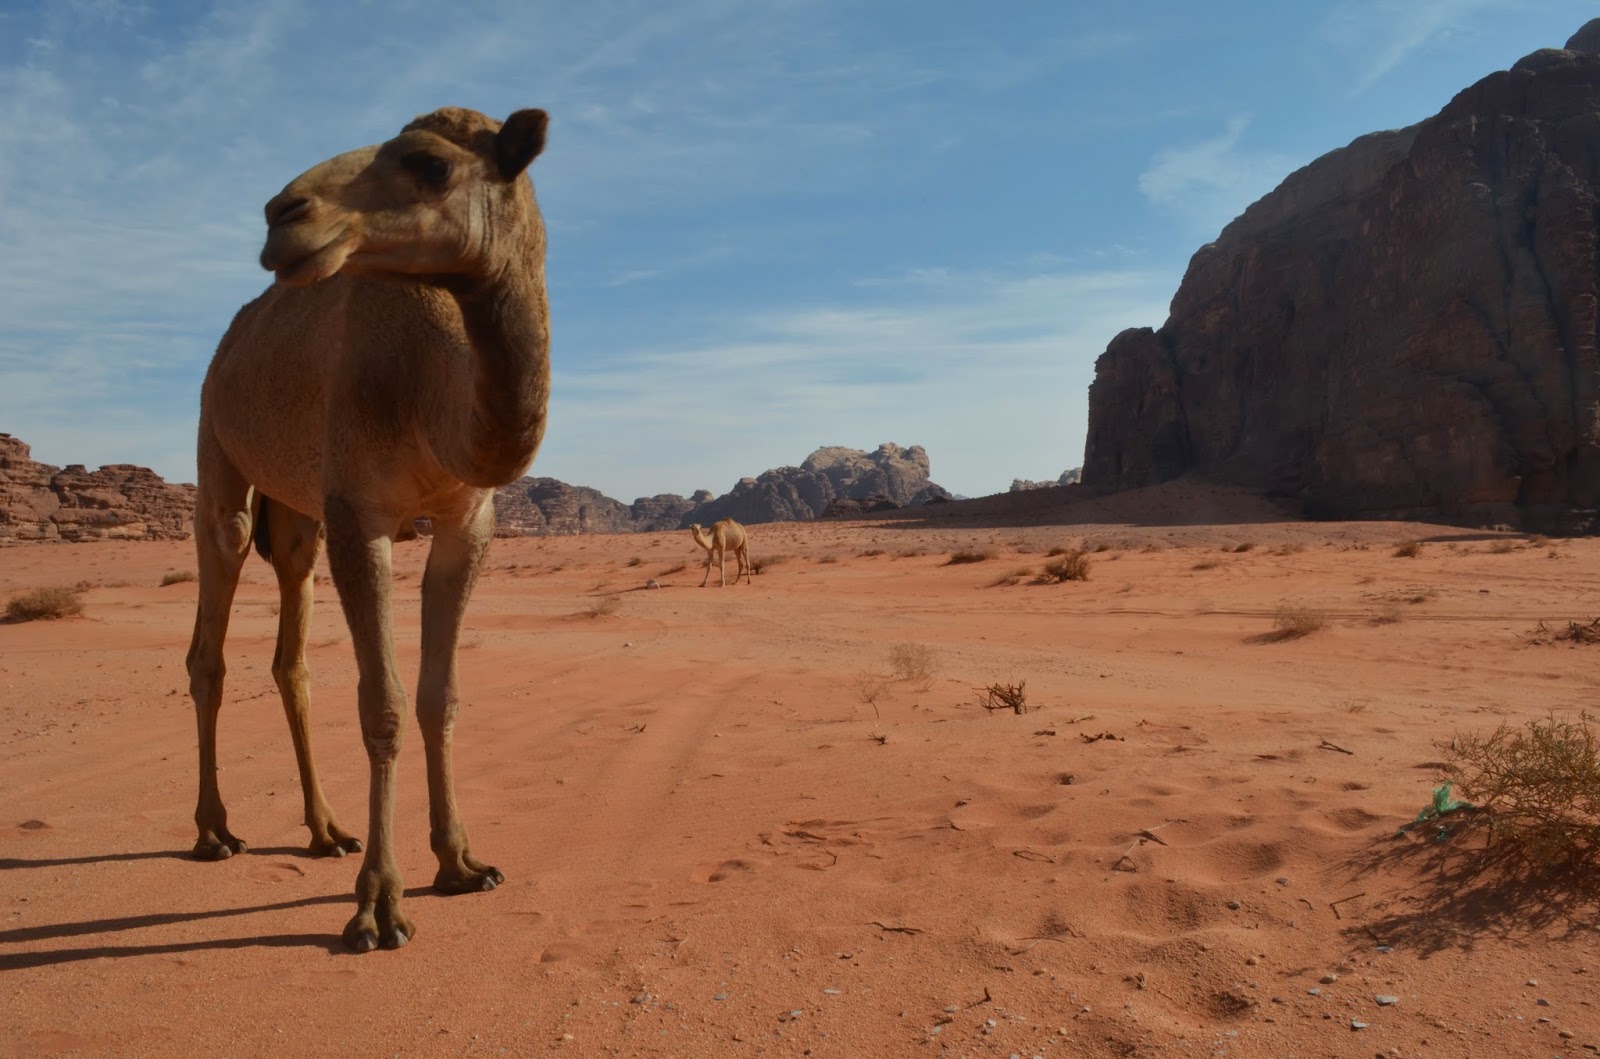 Lovely Animal Camel Image Photos And Wallpaper